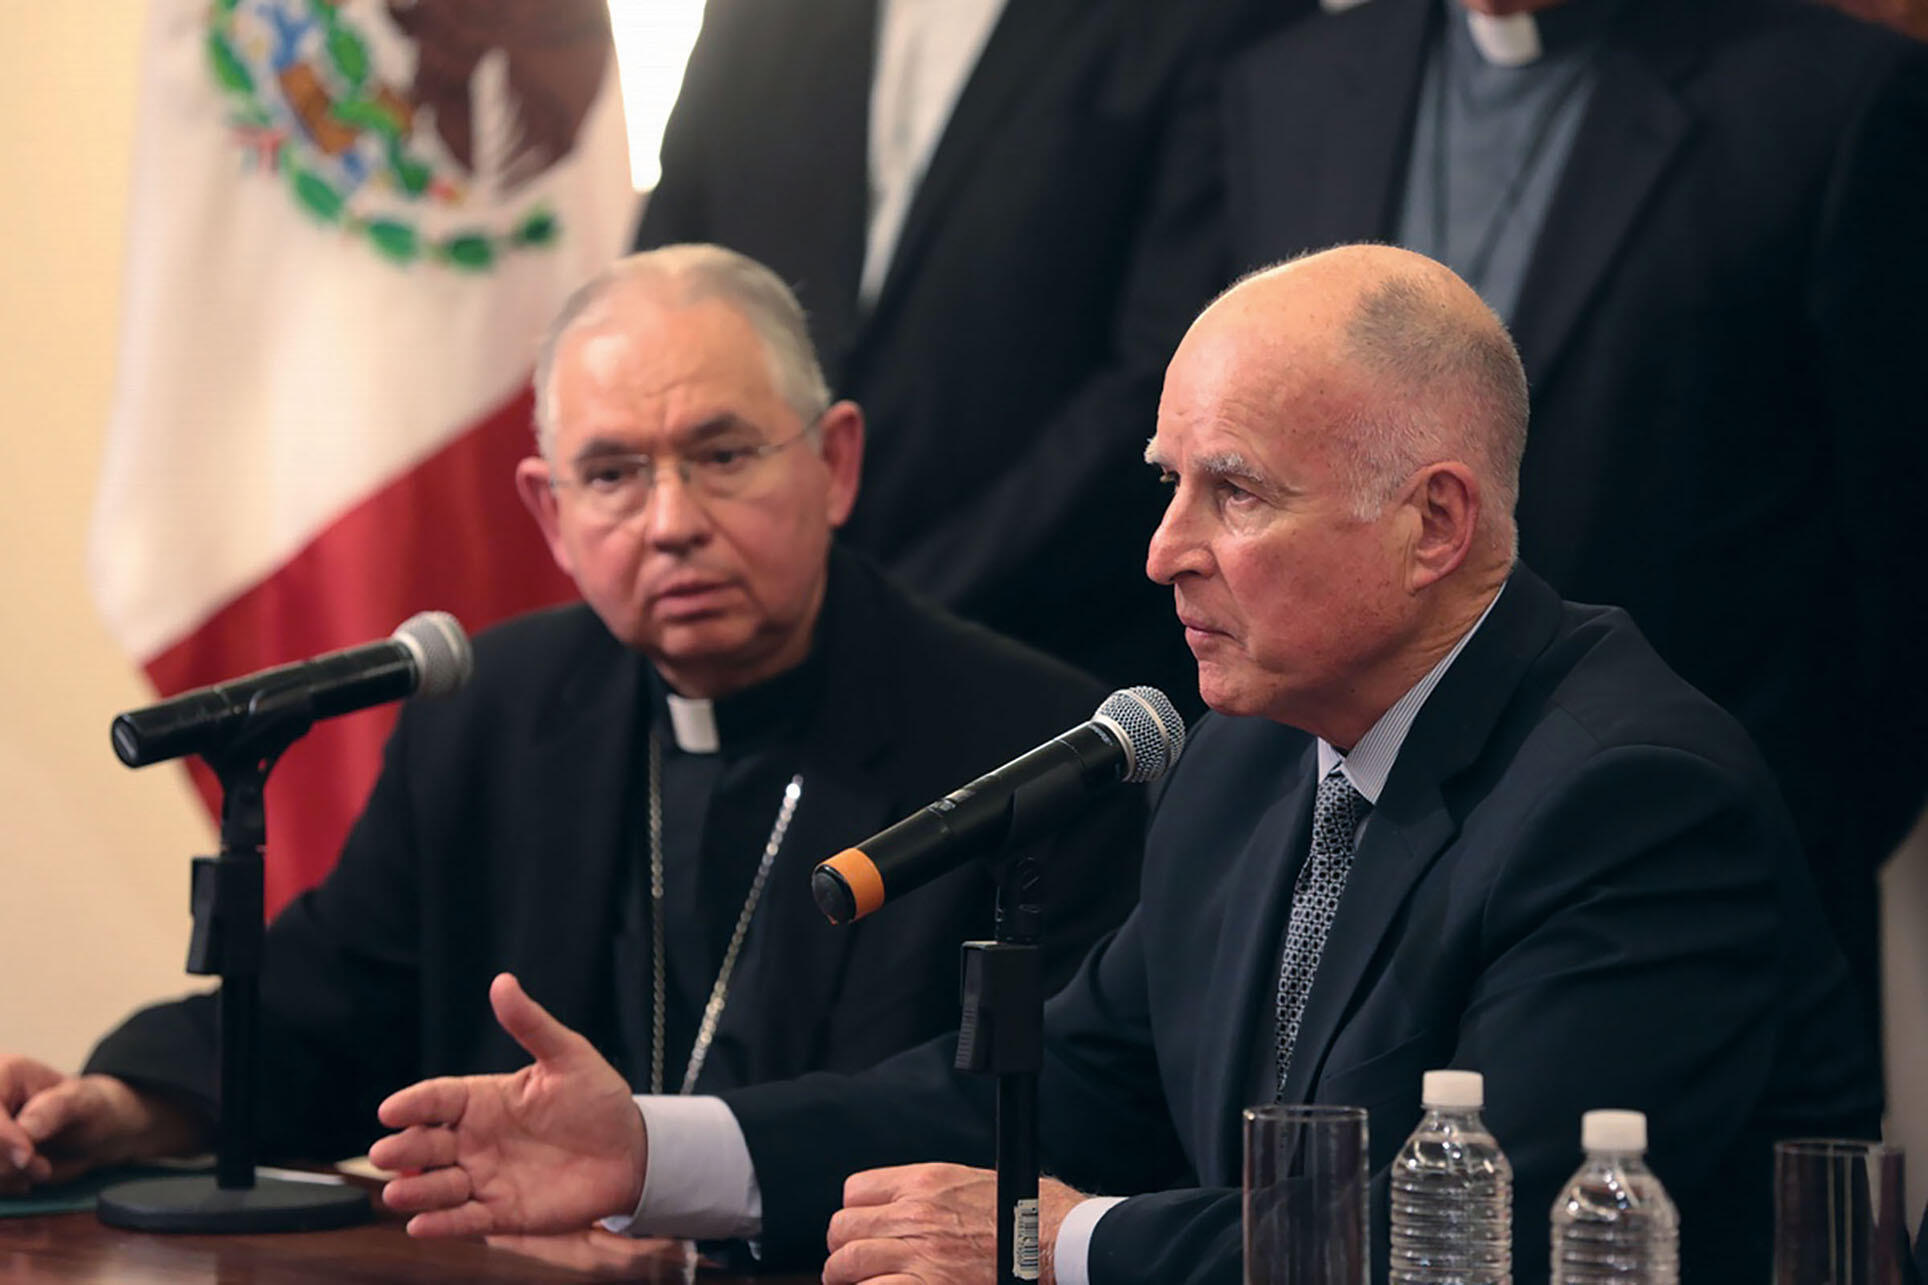 Governor Jerry Brown and Archbishop José Gómez at a Mexico press conference on unaccompanied minors at the U.S. border, July 2014. (Photo by Justin Short, Office of the Governor of California.) Governor Jerry Brown and Archbishop José Gómez at a Mexico pr